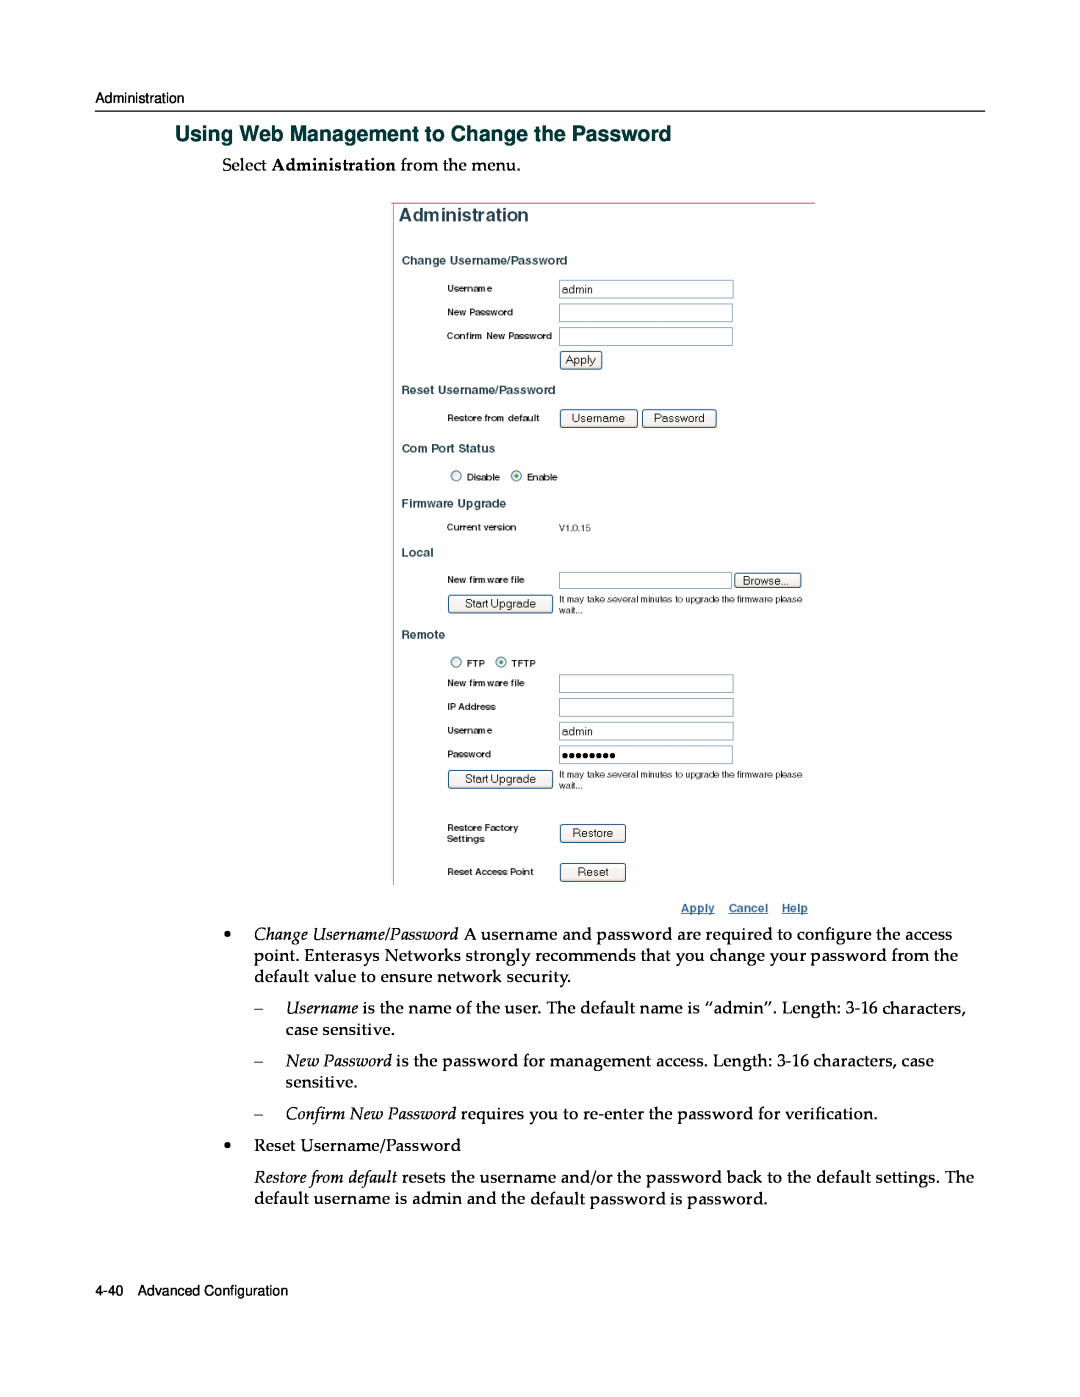 Enterasys Networks RBT-4102 manual Using Web Management to Change the Password 